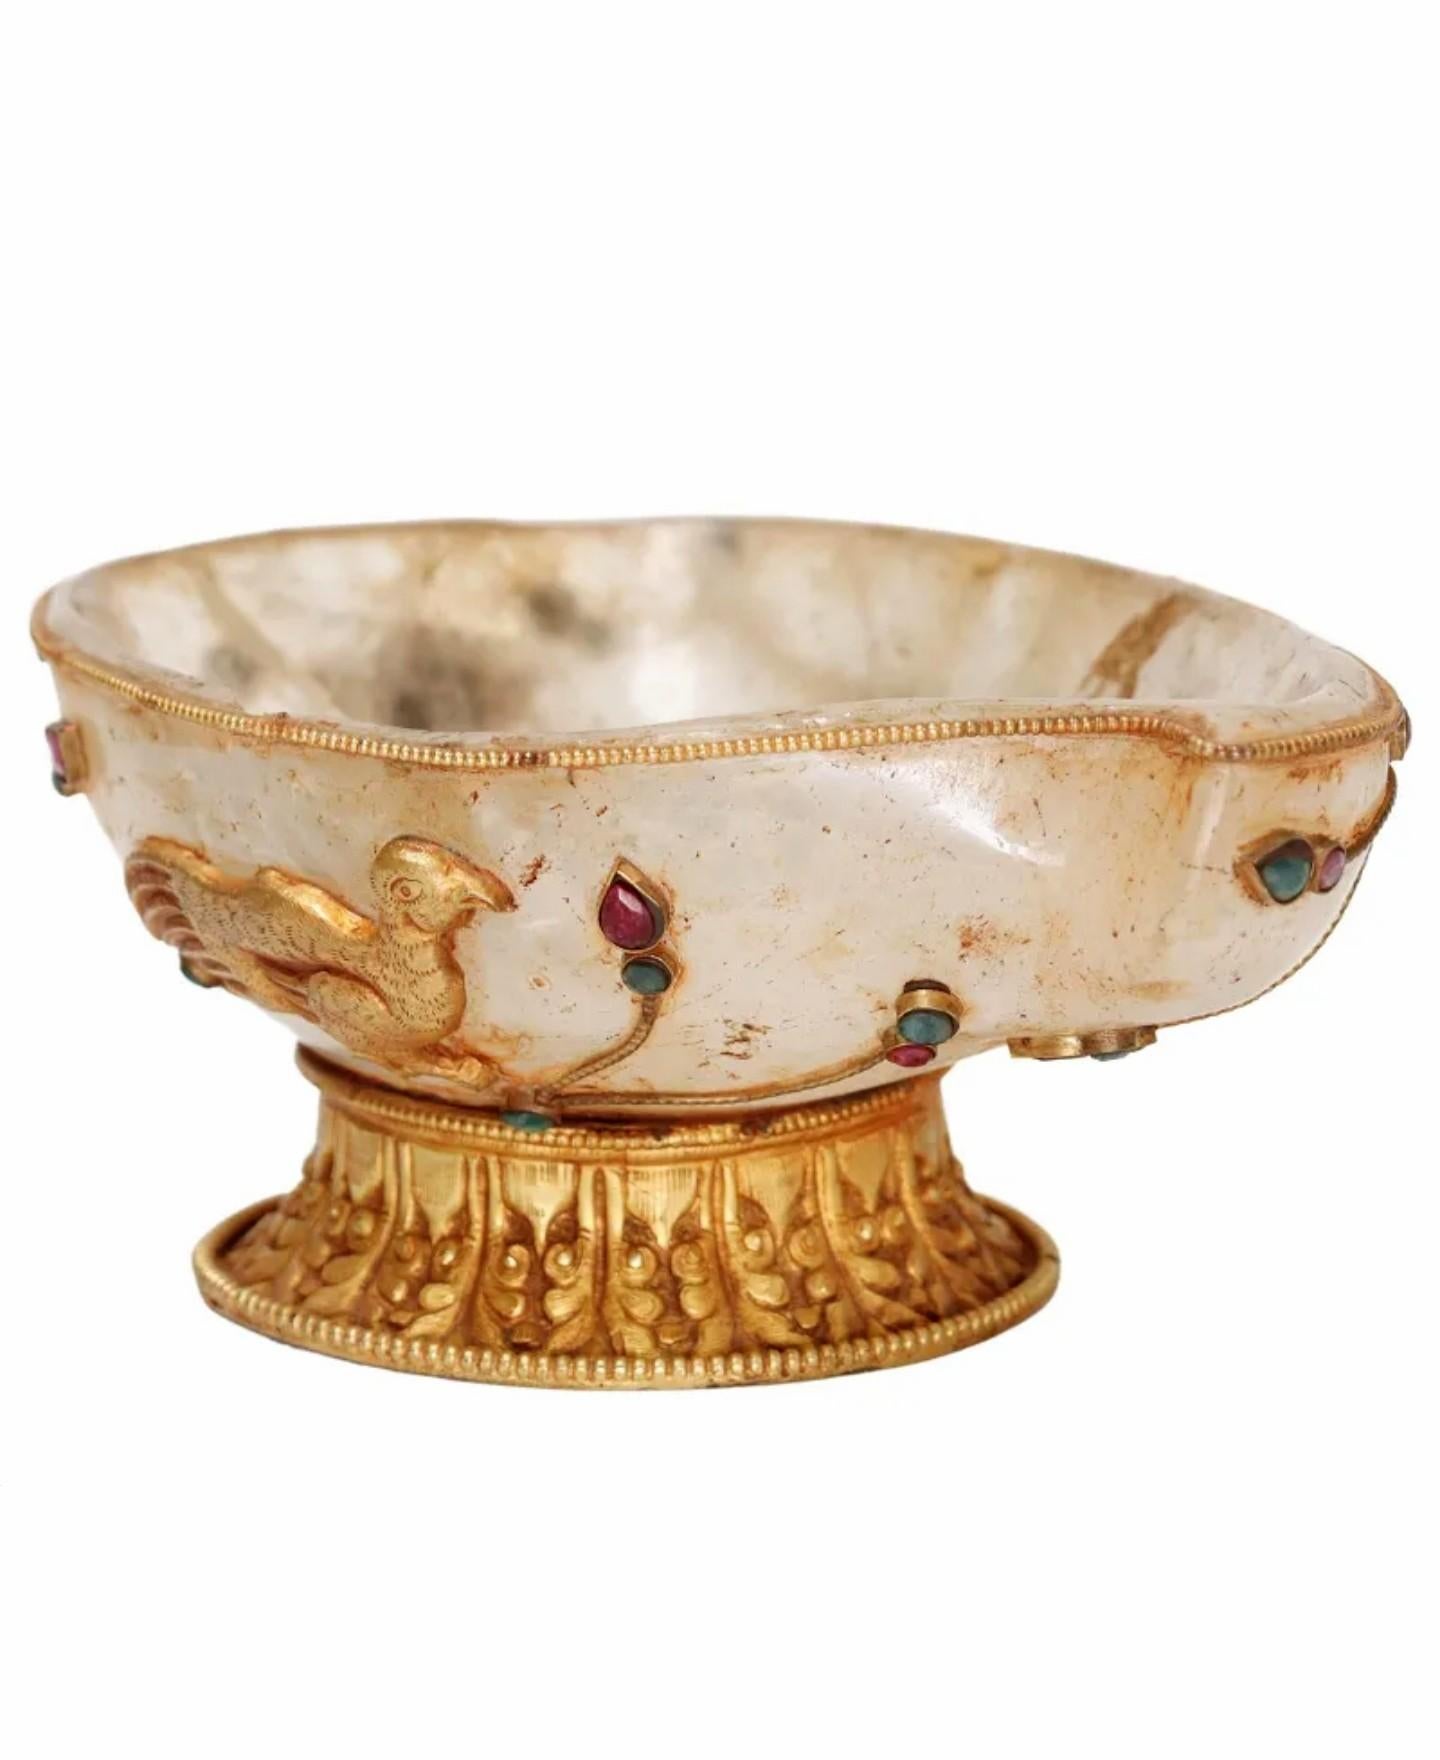 A spectacular Mughal Empire Period (1526-1857) precious gemstone set gilt bronze ormolu mounted carved rock crystal vessel Buddhist altar offering bowl.

Exquisitely handmade, South Asian antique, likely Nepal / Himalayan / Tibetan Plateau region,